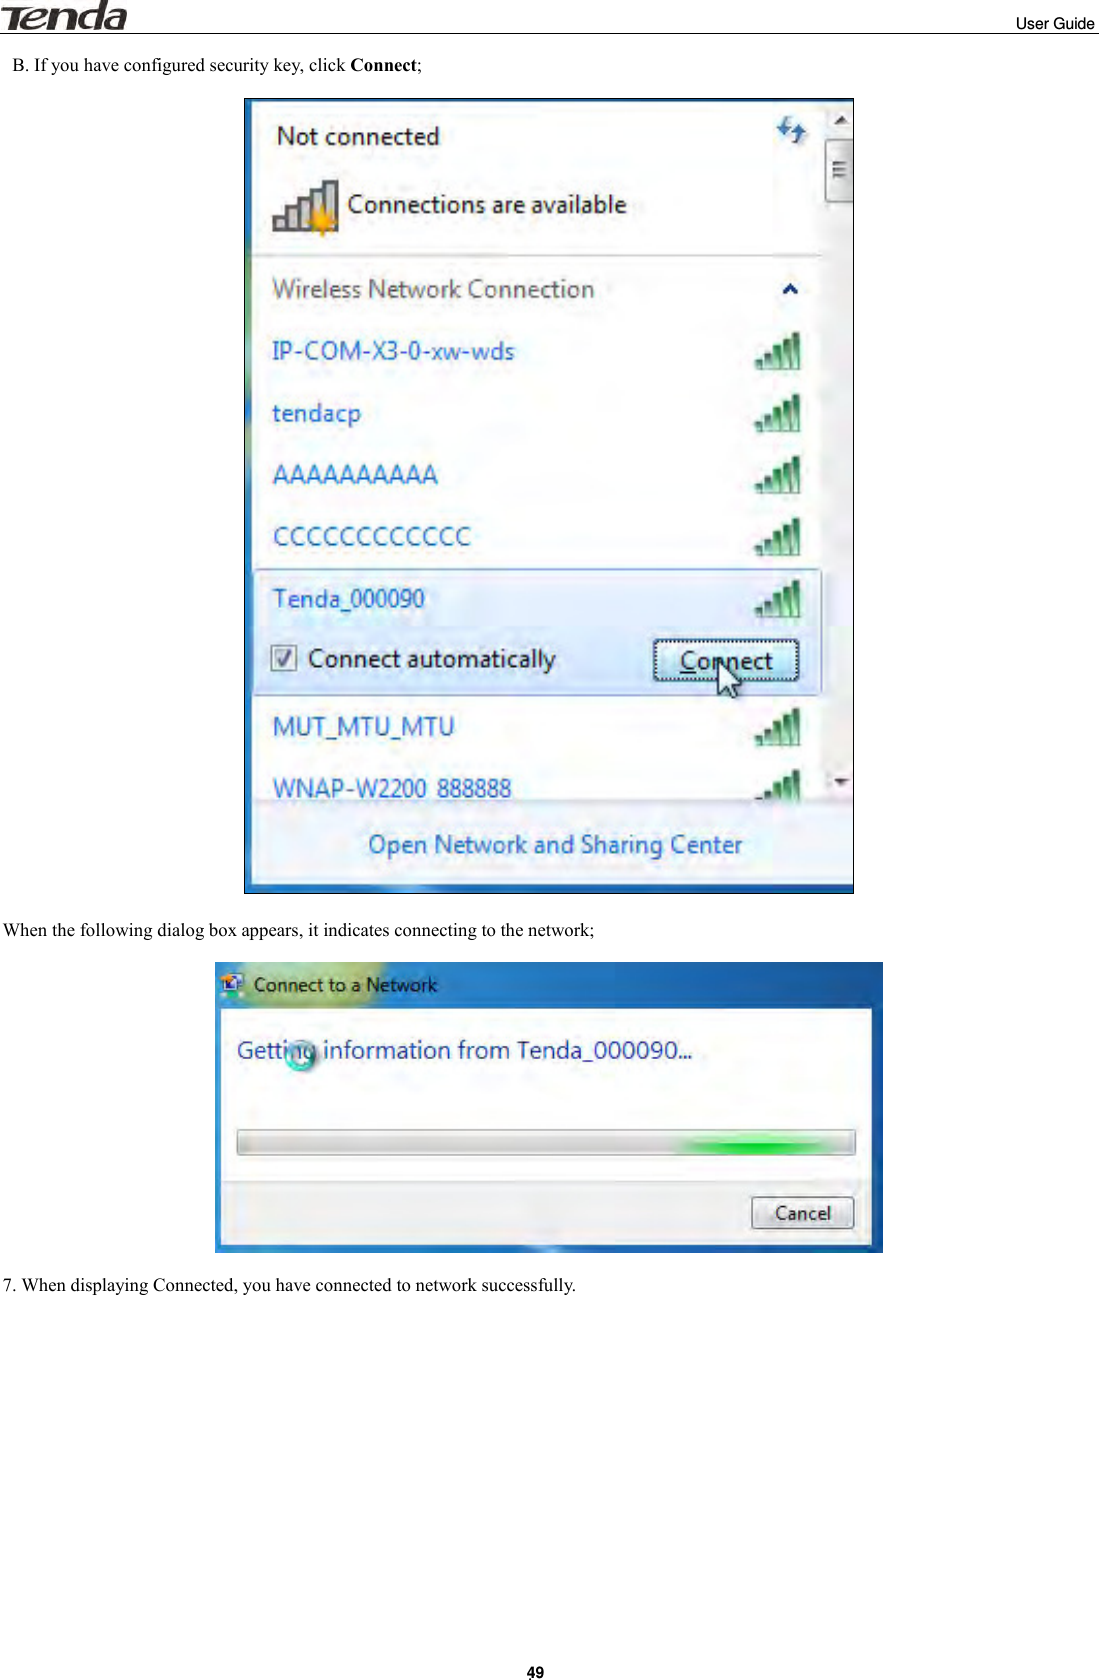                                                                                                                                                                                                                         User Guide . 49   B. If you have configured security key, click Connect;    When the following dialog box appears, it indicates connecting to the network;    7. When displaying Connected, you have connected to network successfully.   